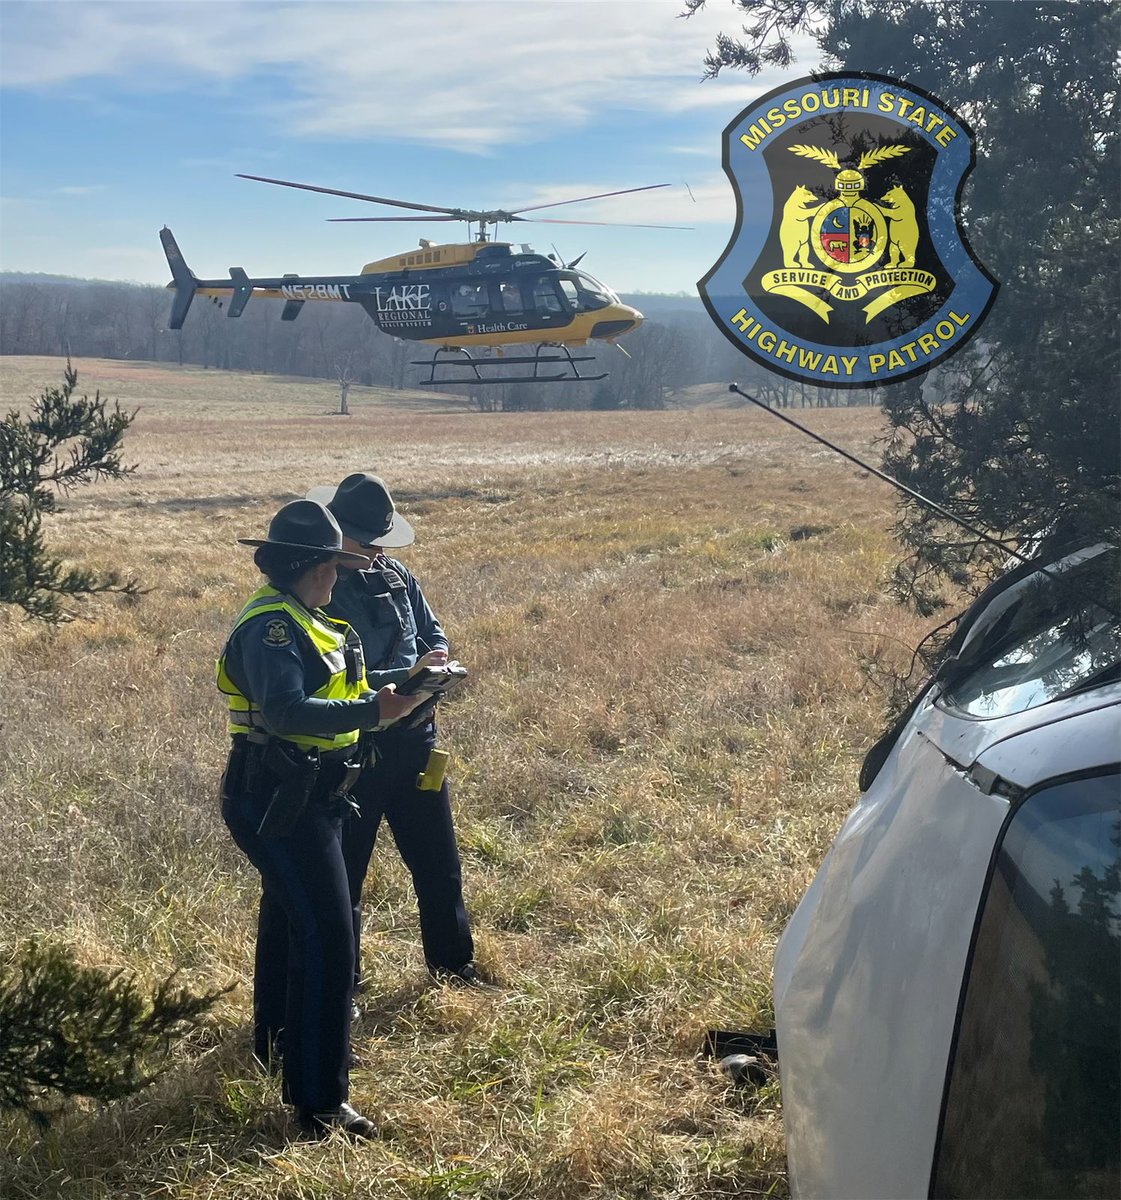 It’s a situation we hate to see and happens far too often…

Another person is being flown to a hospital after being involved in a crash while unrestrained and was ejected from the vehicle.

Please make sure EVERYONE in your vehicle is buckled up.
#BuckleUpPhoneDown